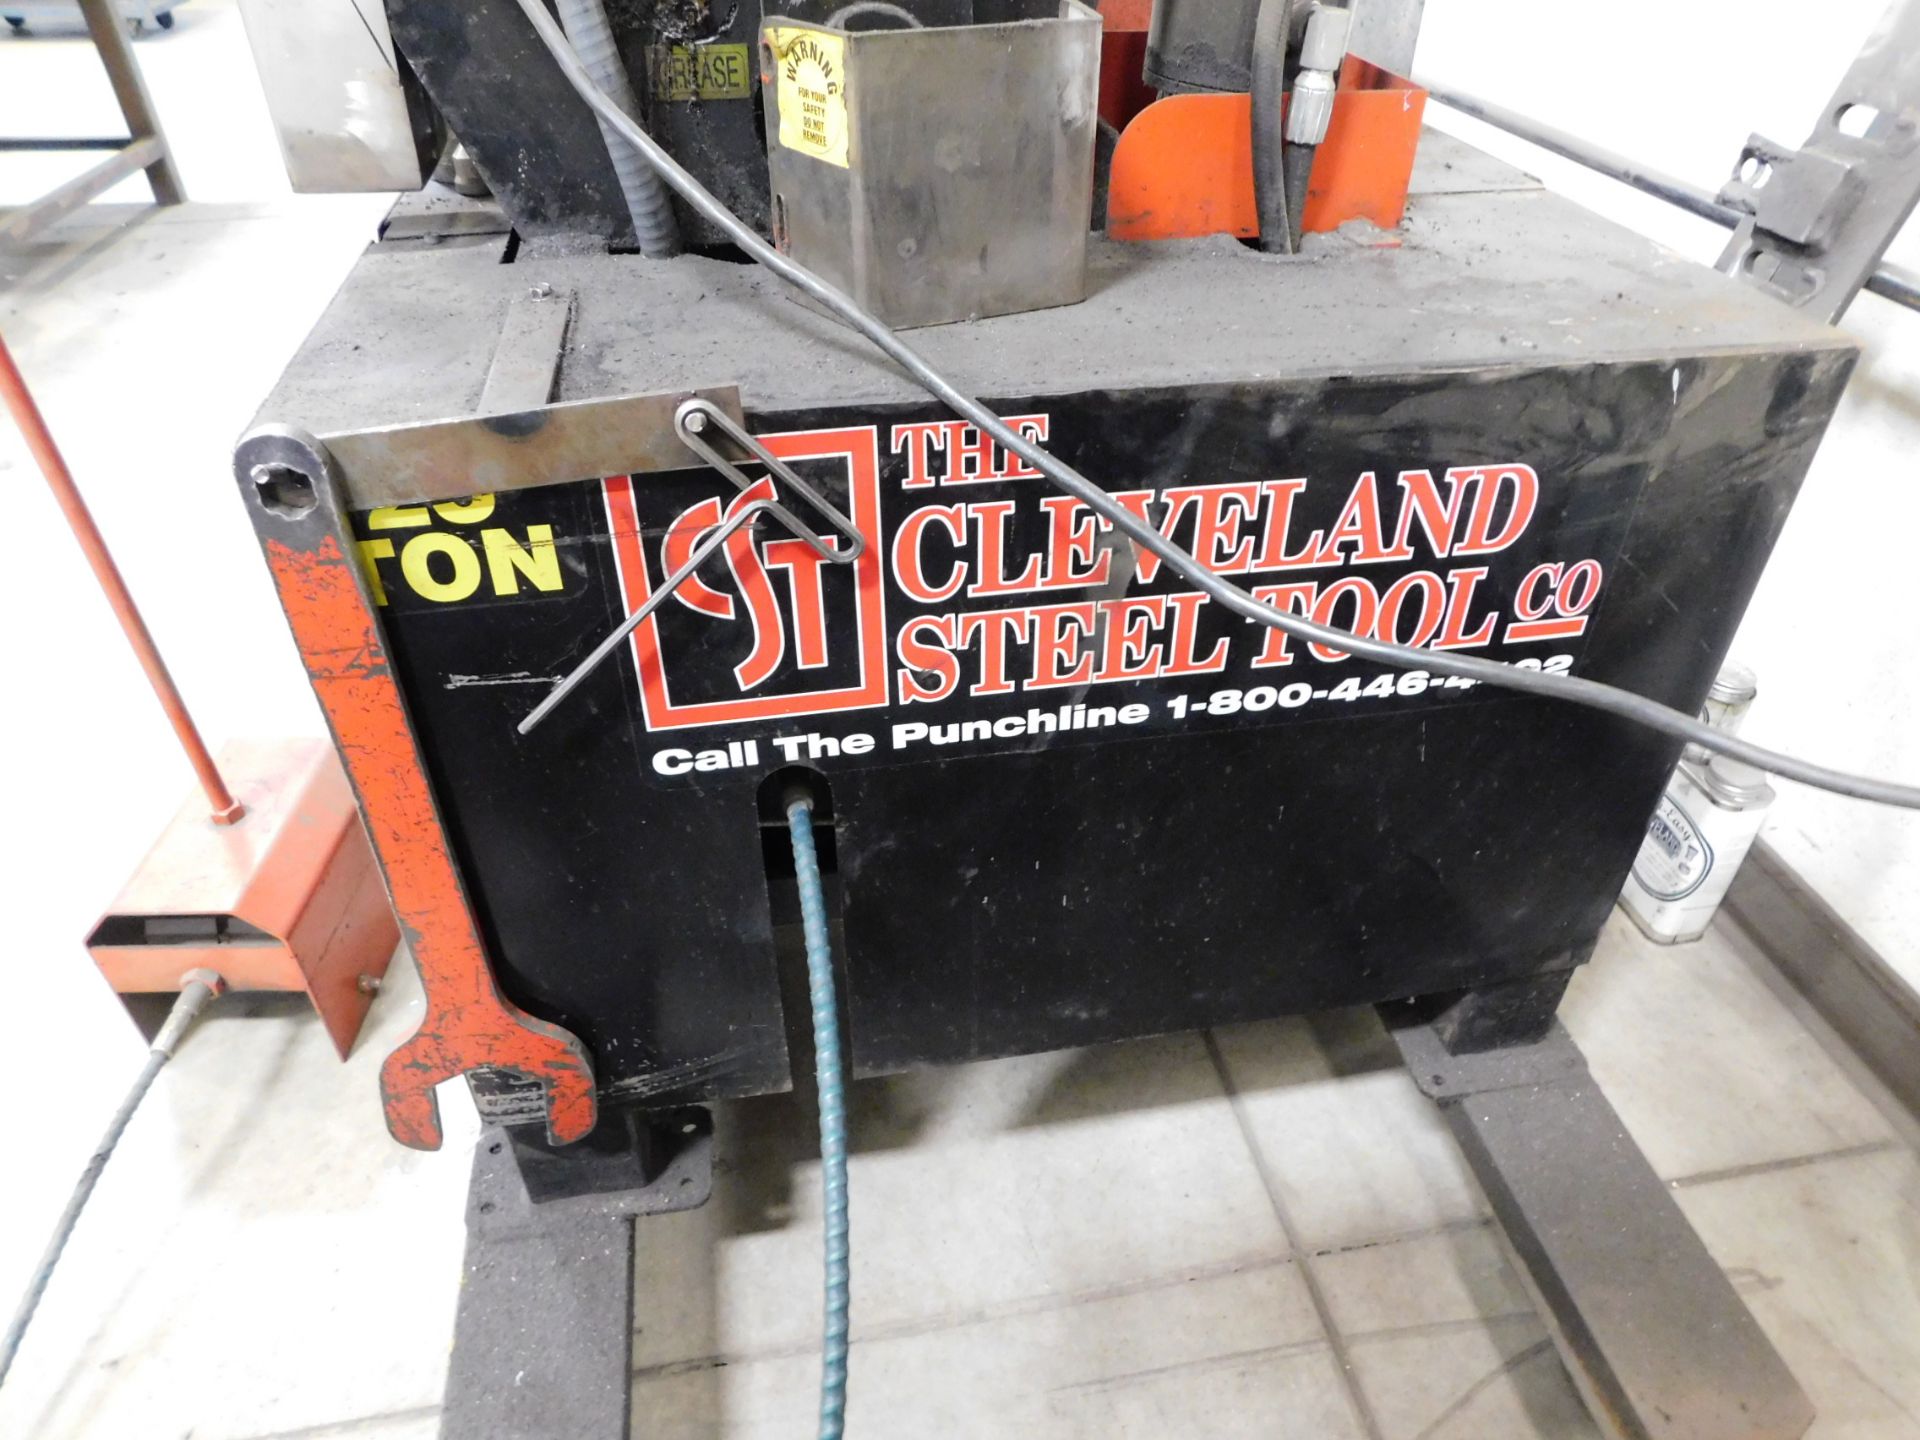 Cleveland Steel Tool 25-Ton Hydraulic Ironworker, SN 07772506, Max. Punch Cap: 1" Diameter Hole in - Image 9 of 9